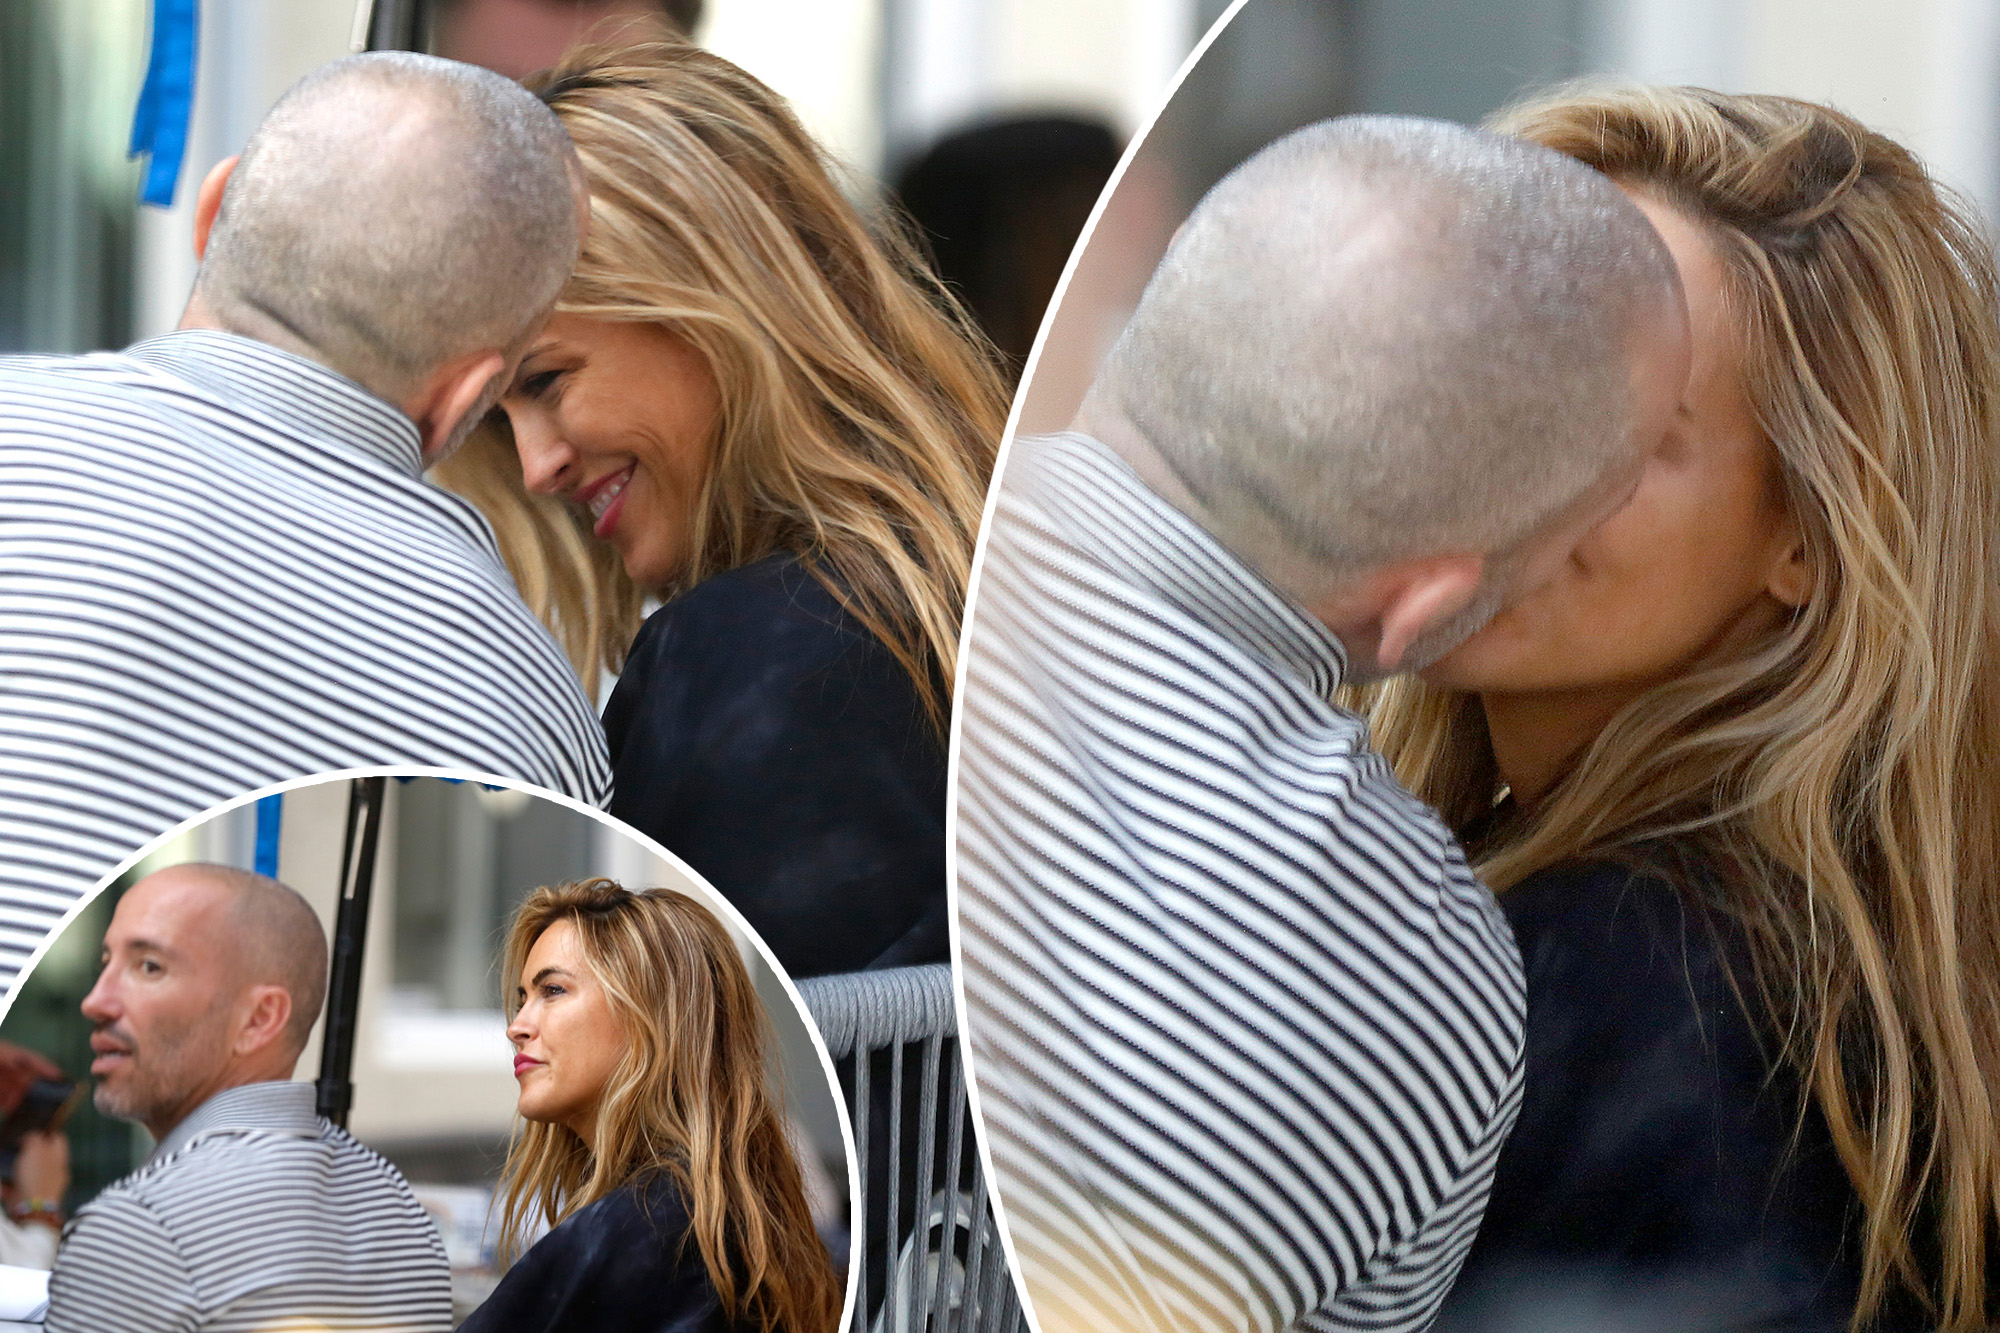 Chrishell Stause and Jason Oppenheim budge hard on the PDA on lunch date in LA